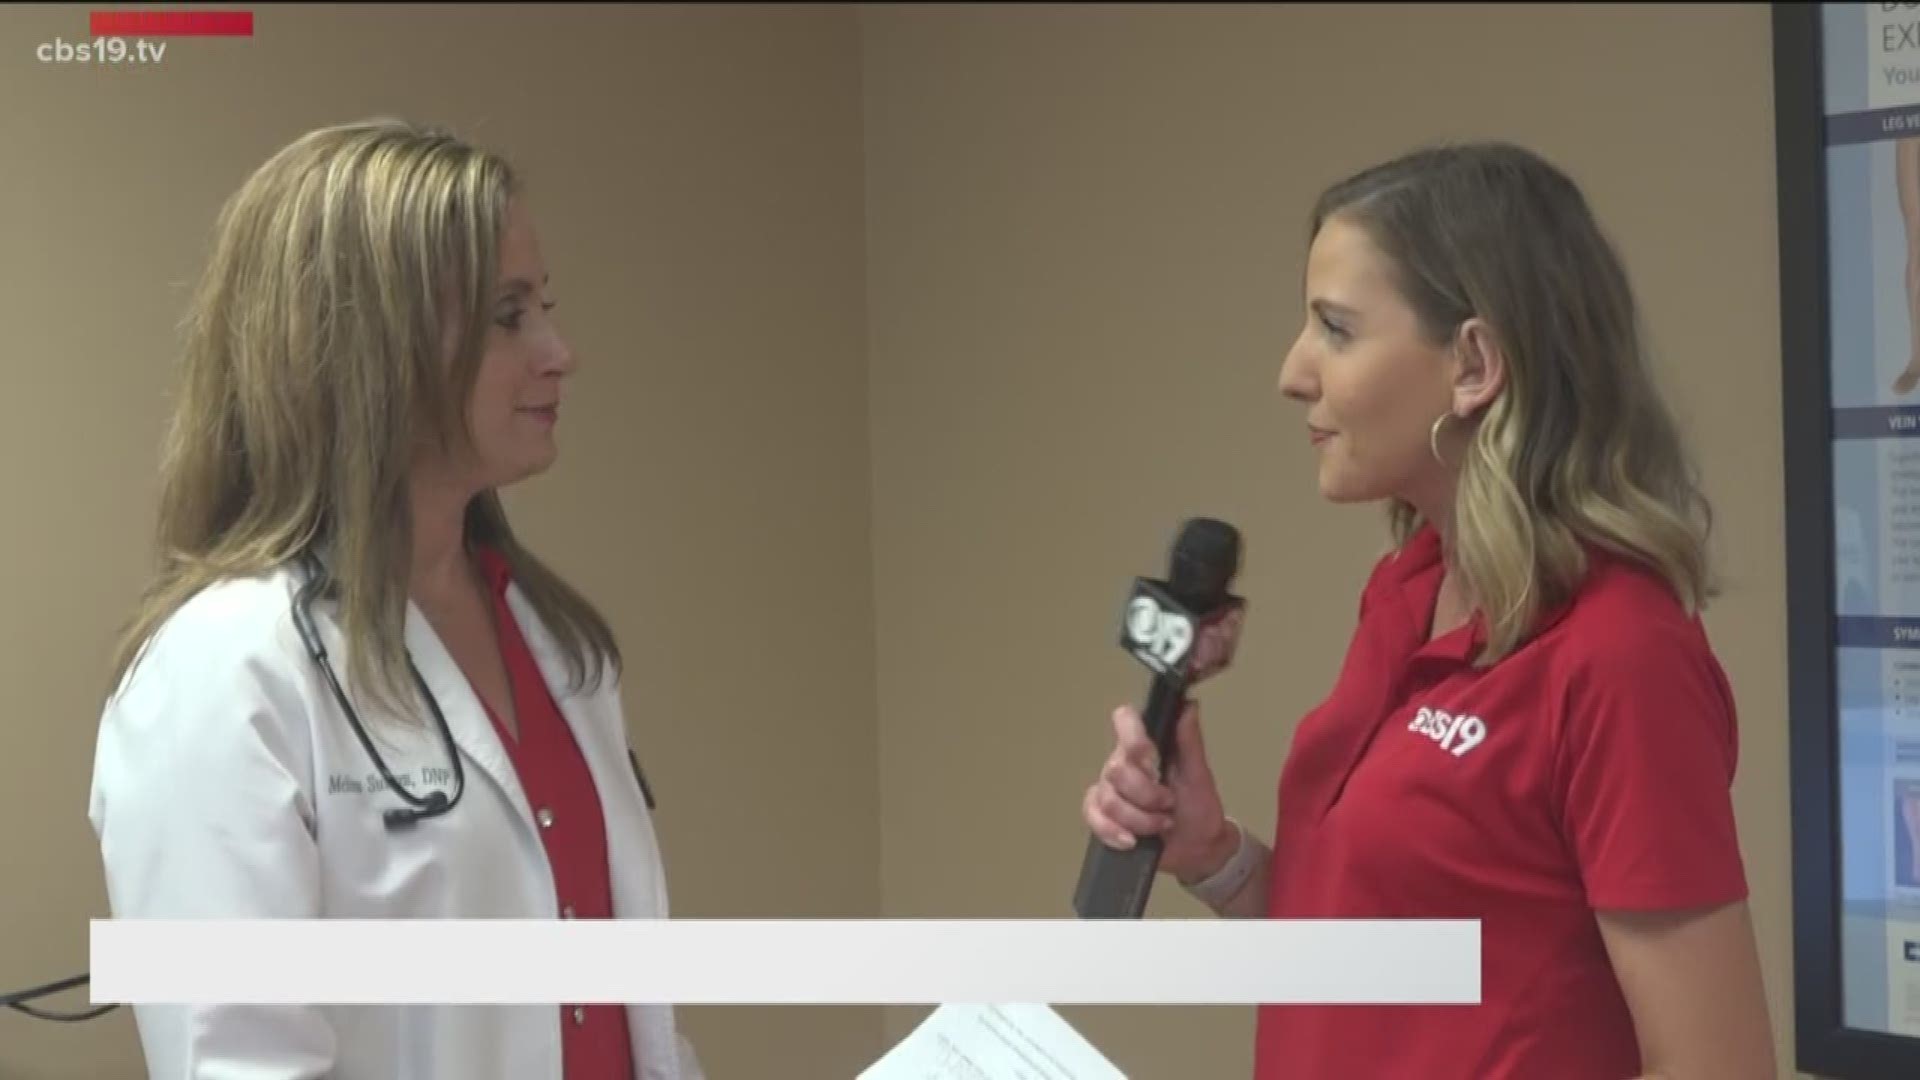 Longview Regional Medical Center explains the causes and warning signs of a heart attack.